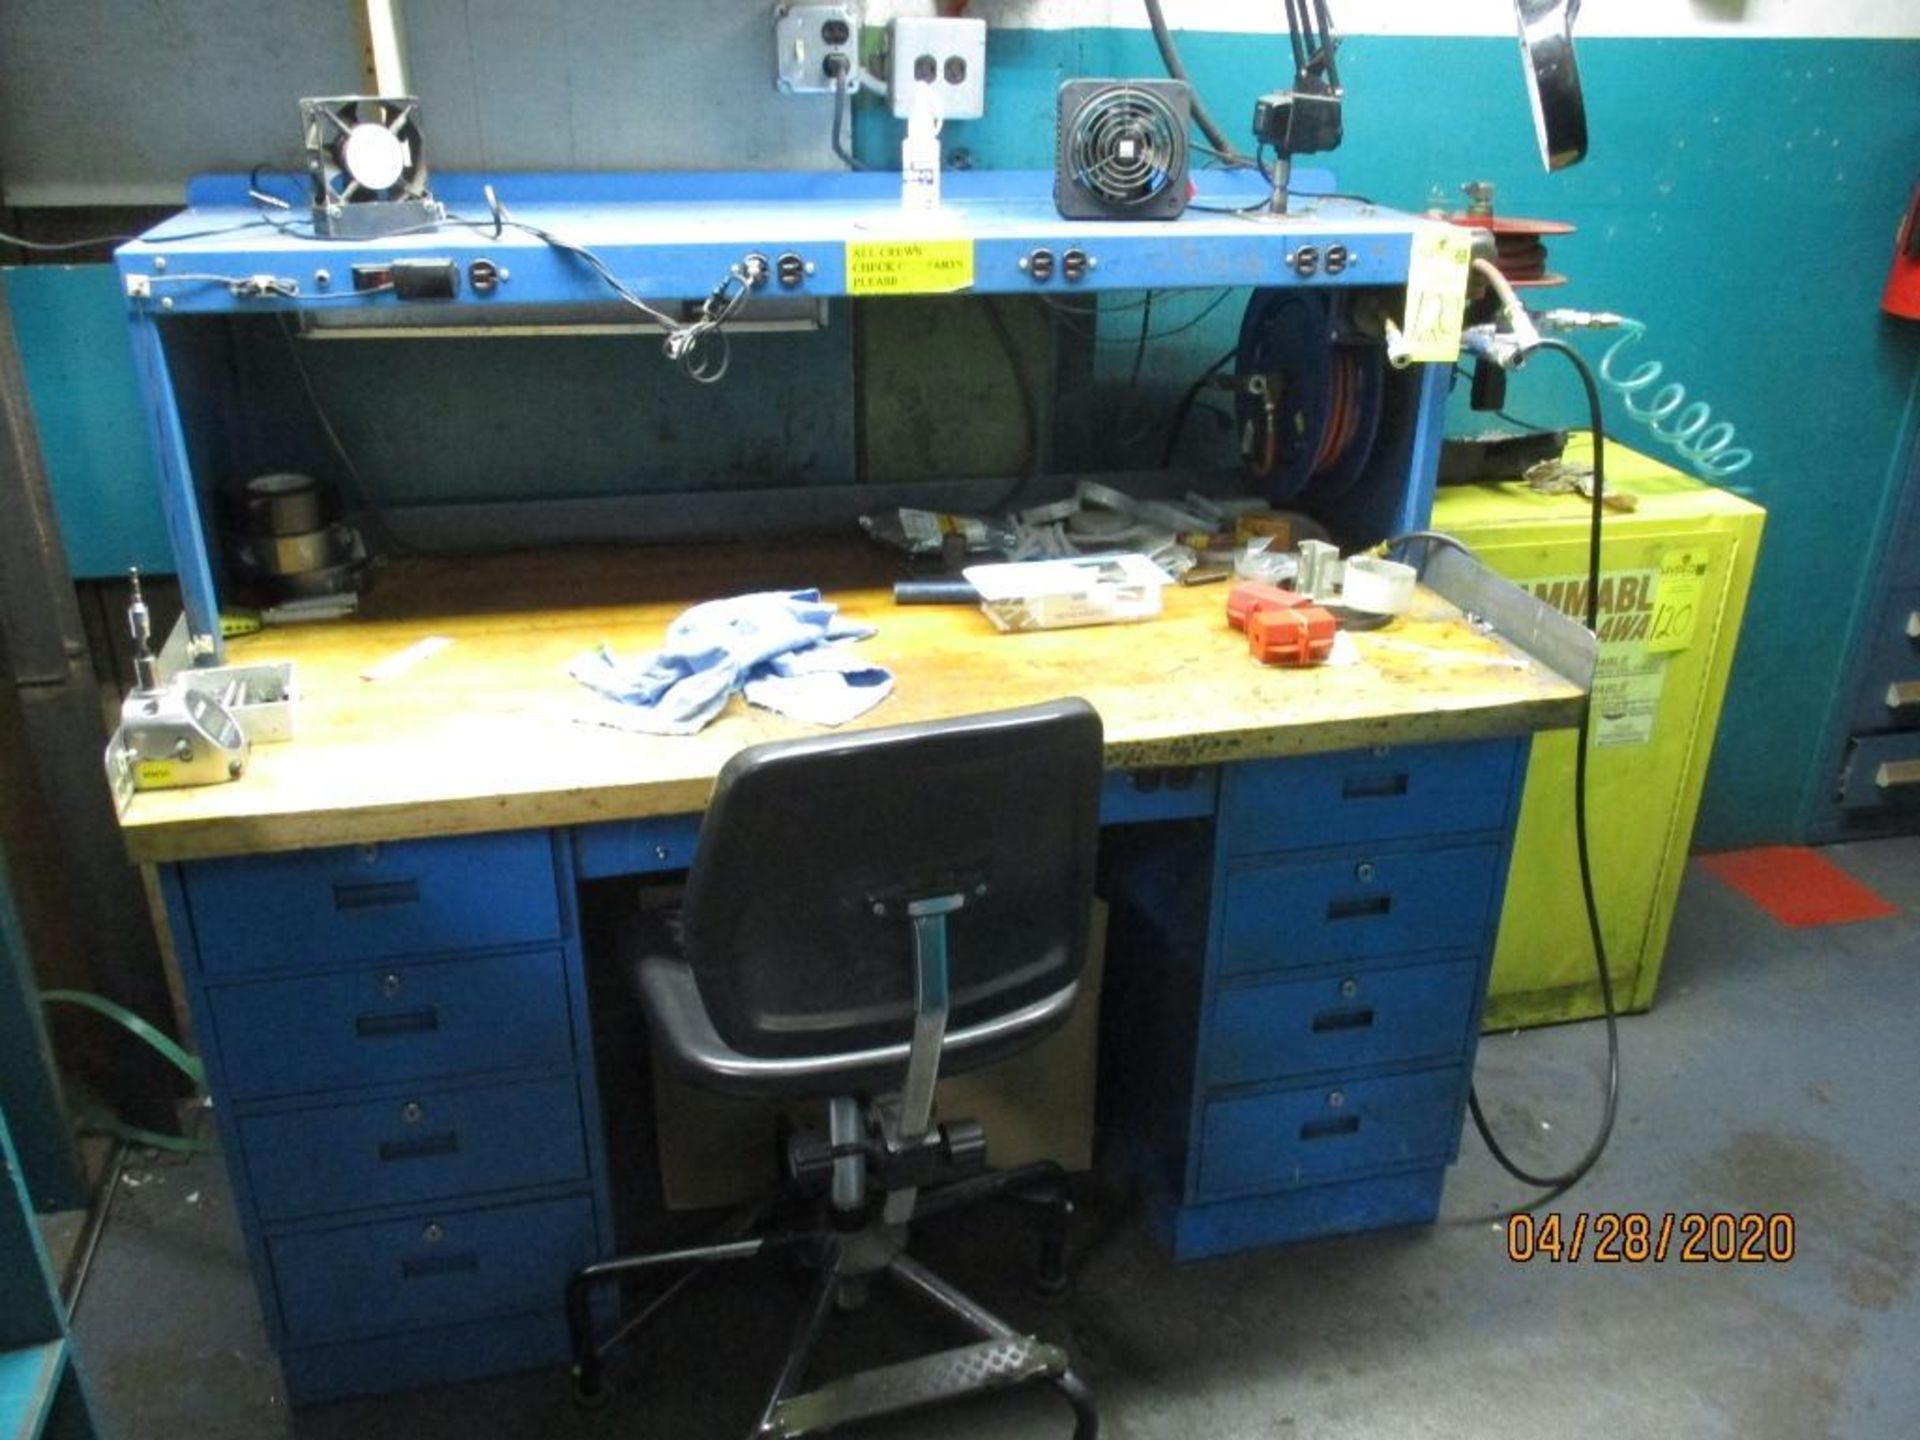 Work Bench With Electrical Outlets, Two Air Hose Reels, Magnifier Light, And Small Flammable Cabinet